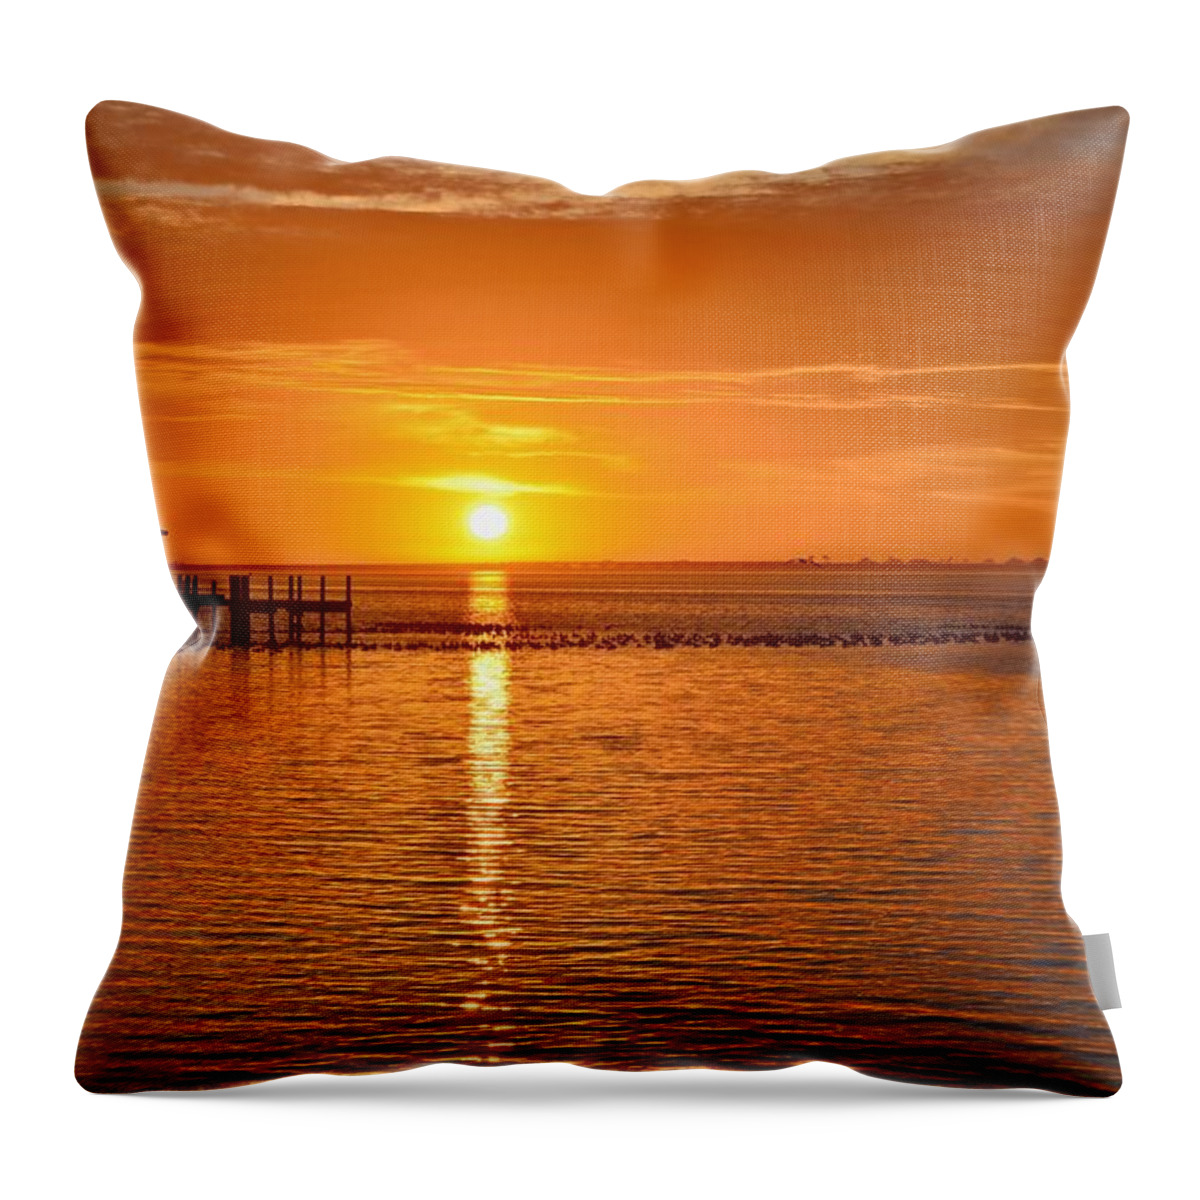 20120109 Throw Pillow featuring the photograph 0109 Sunrise Reflections with Ducks and Colorful Clouds on Sound by Jeff at JSJ Photography